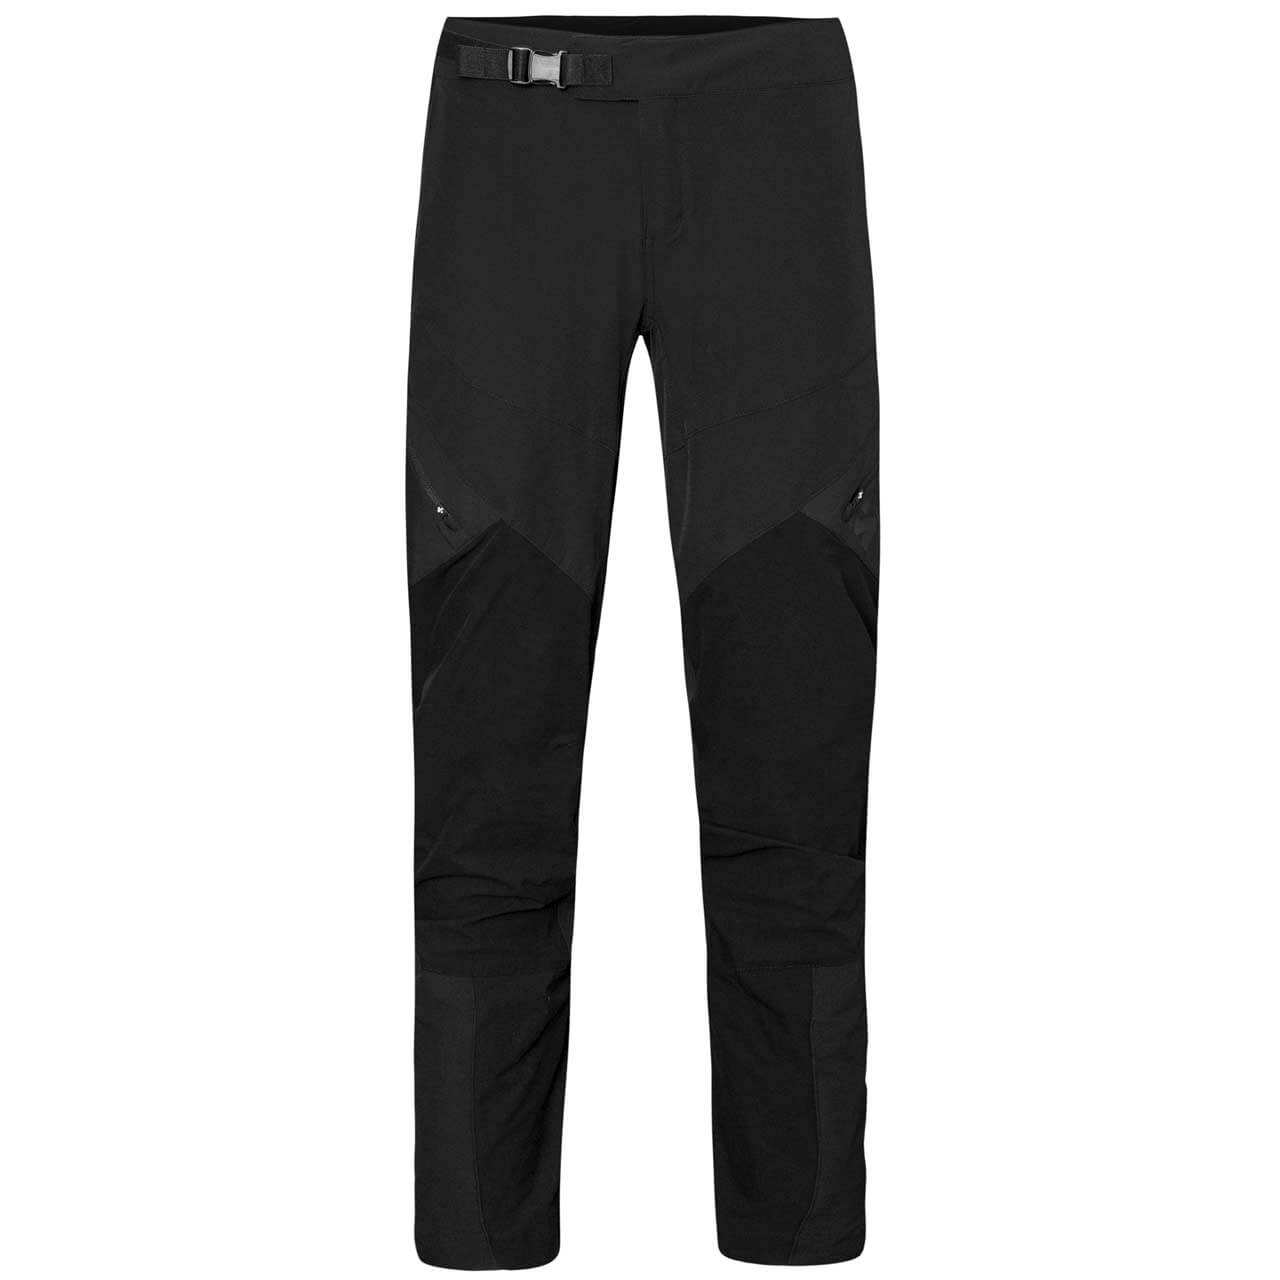 Sweet Protection Hunter Pants - Black, M von Sweet Protection